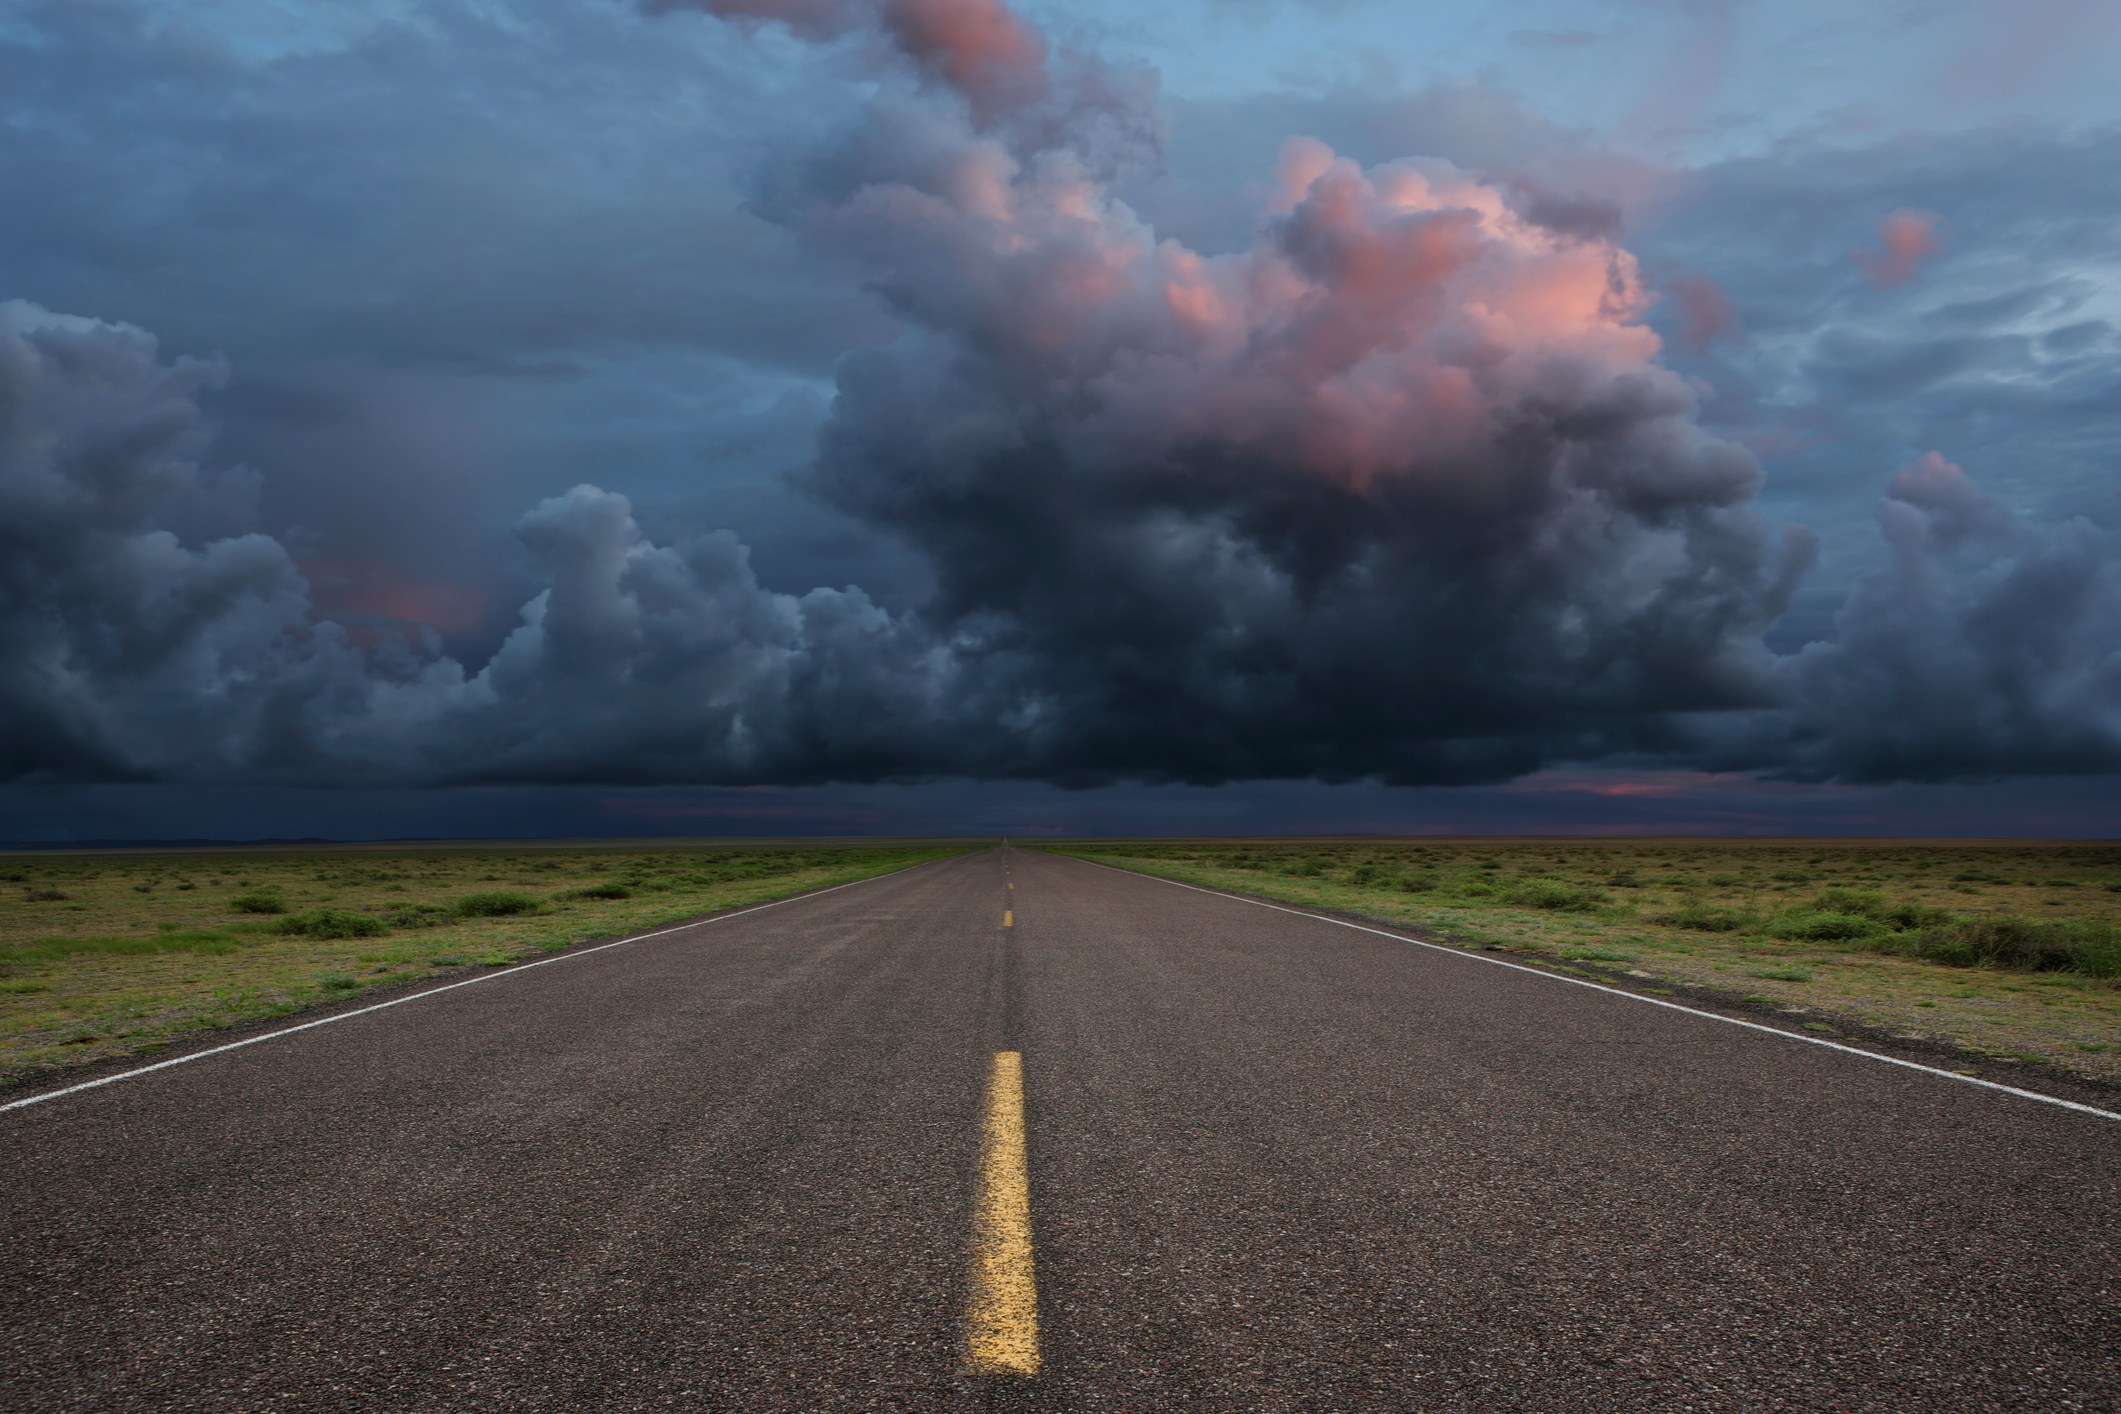 A summertime road trip sounds like a great time, but are you prepared for bad weather?